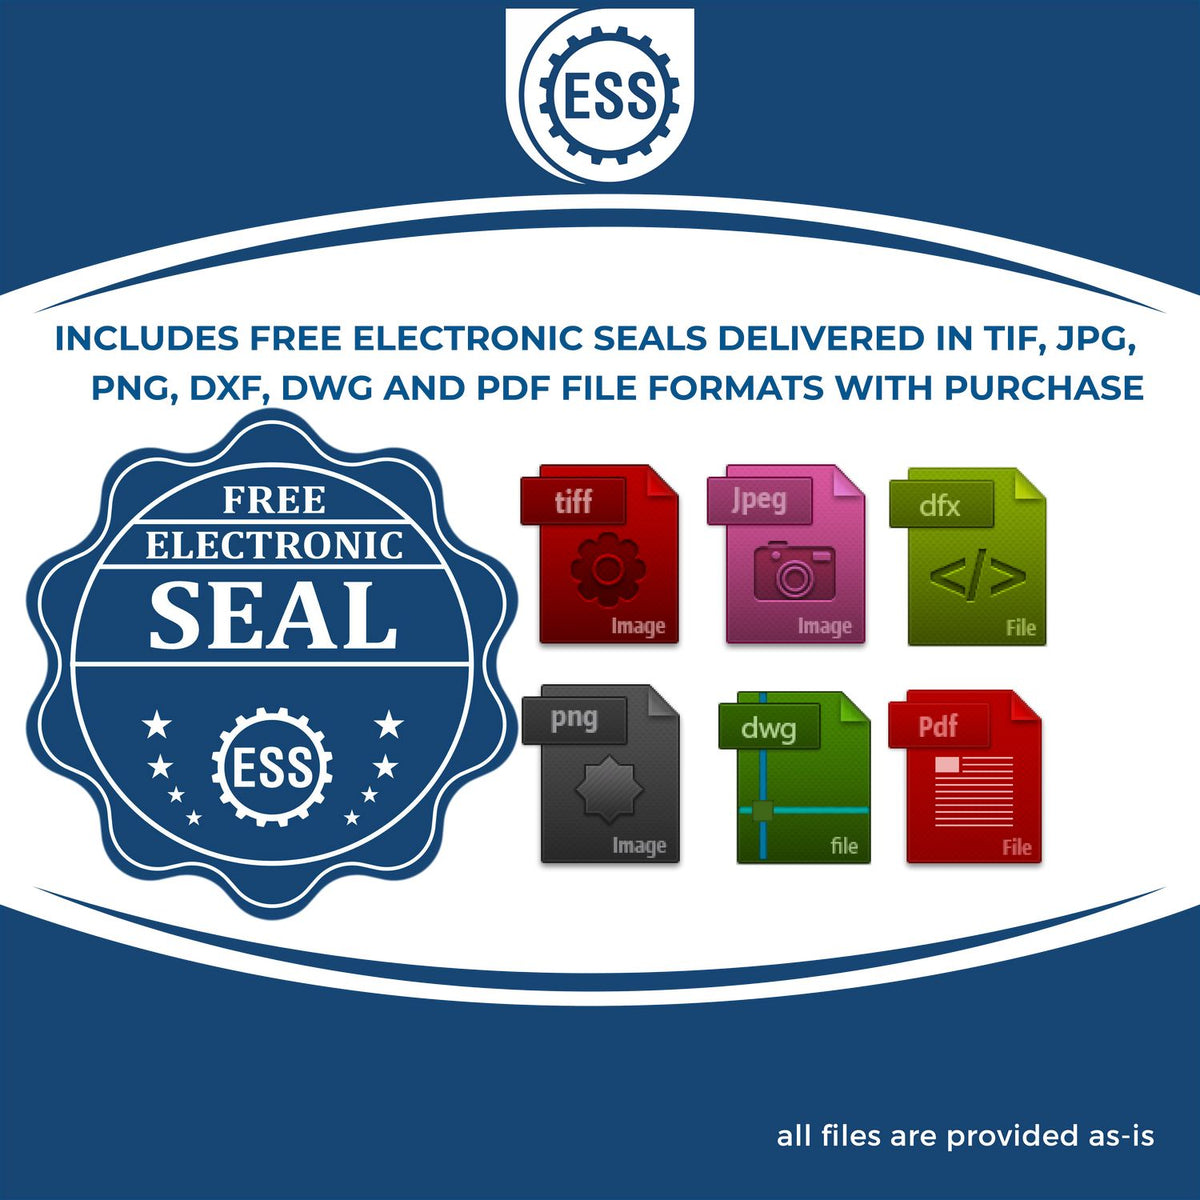 An infographic for the free electronic seal for the Slim Pre-Inked Kansas Professional Engineer Seal Stamp illustrating the different file type icons such as DXF, DWG, TIF, JPG and PNG.